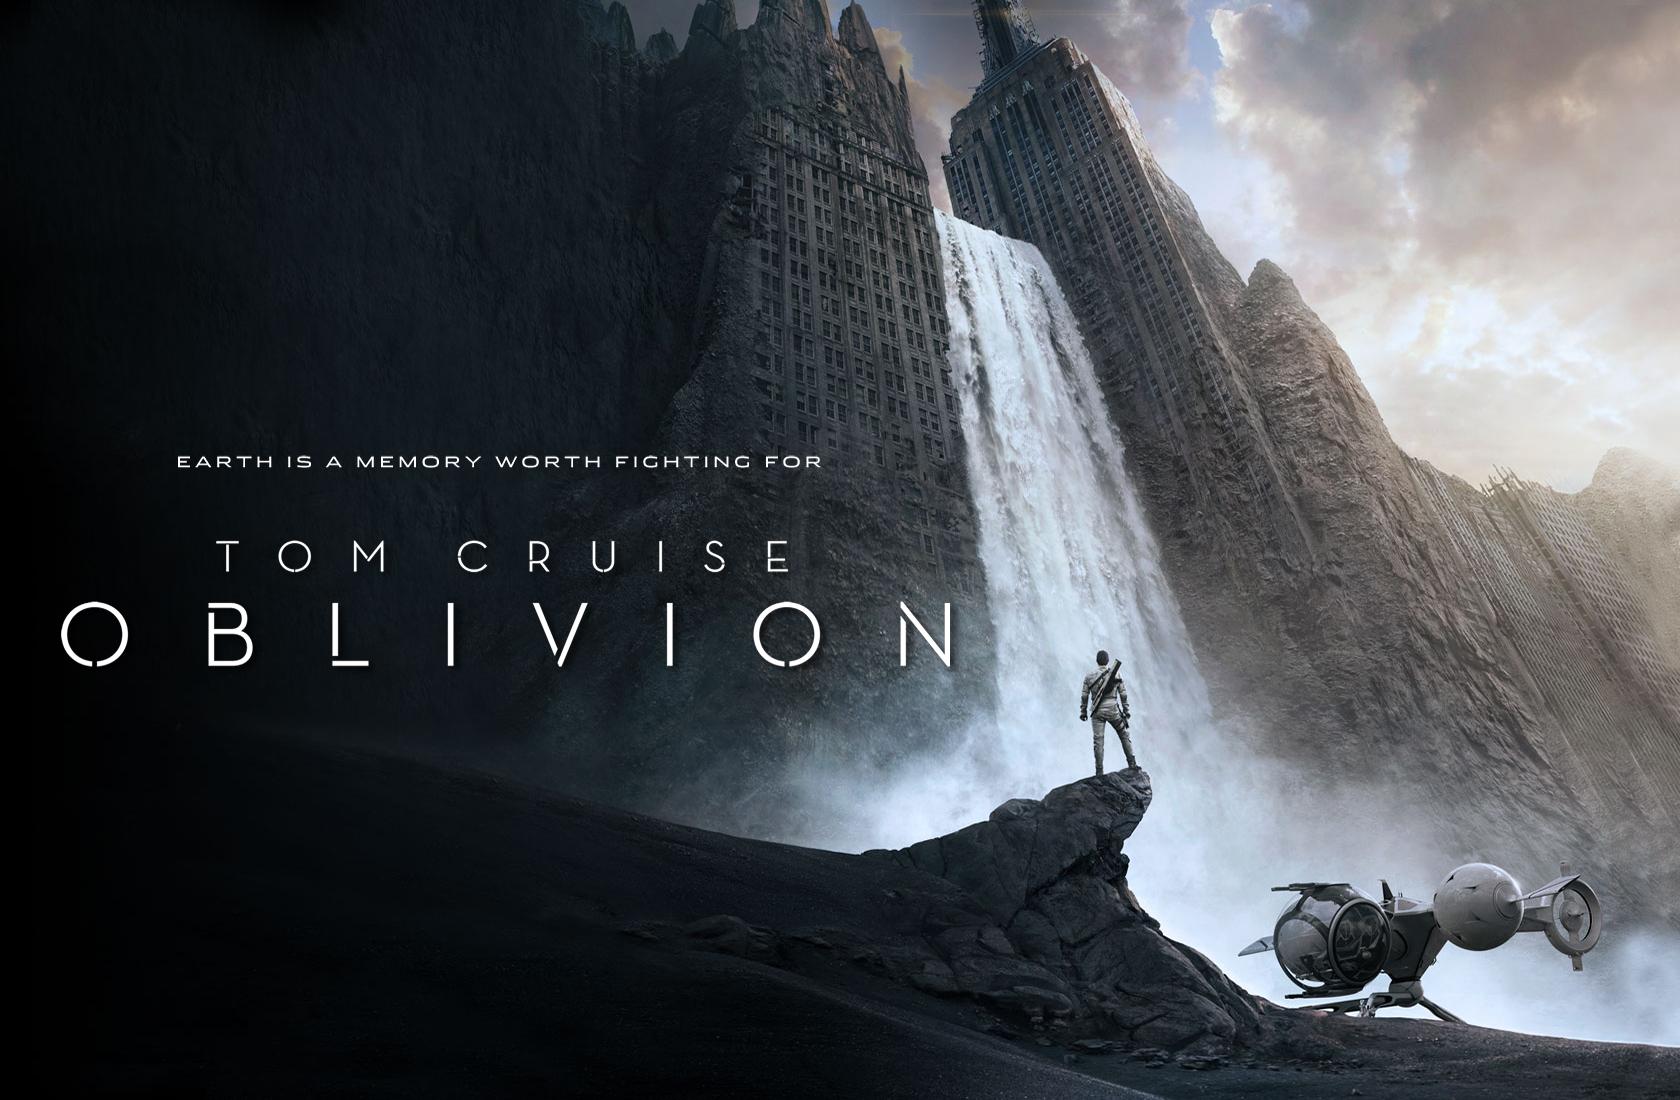 HD Wallpaper Screenshots Of Oblivion With Tom Cruise. Movie